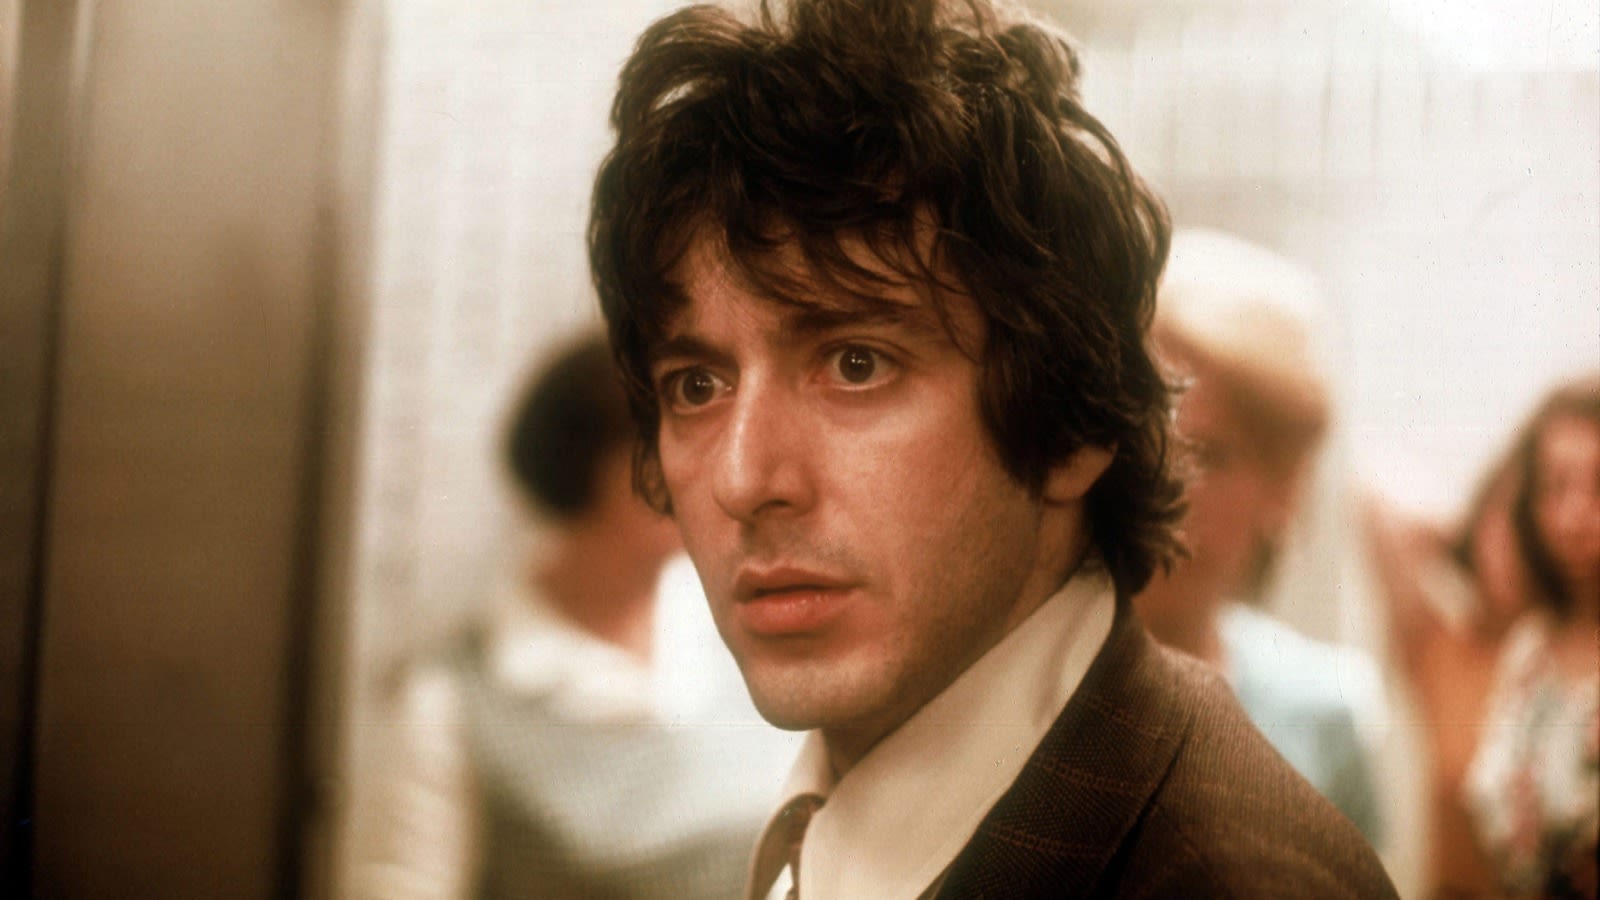 Al Pacino Improvised A Classic Moment In Dog Day Afternoon - SlashFilm